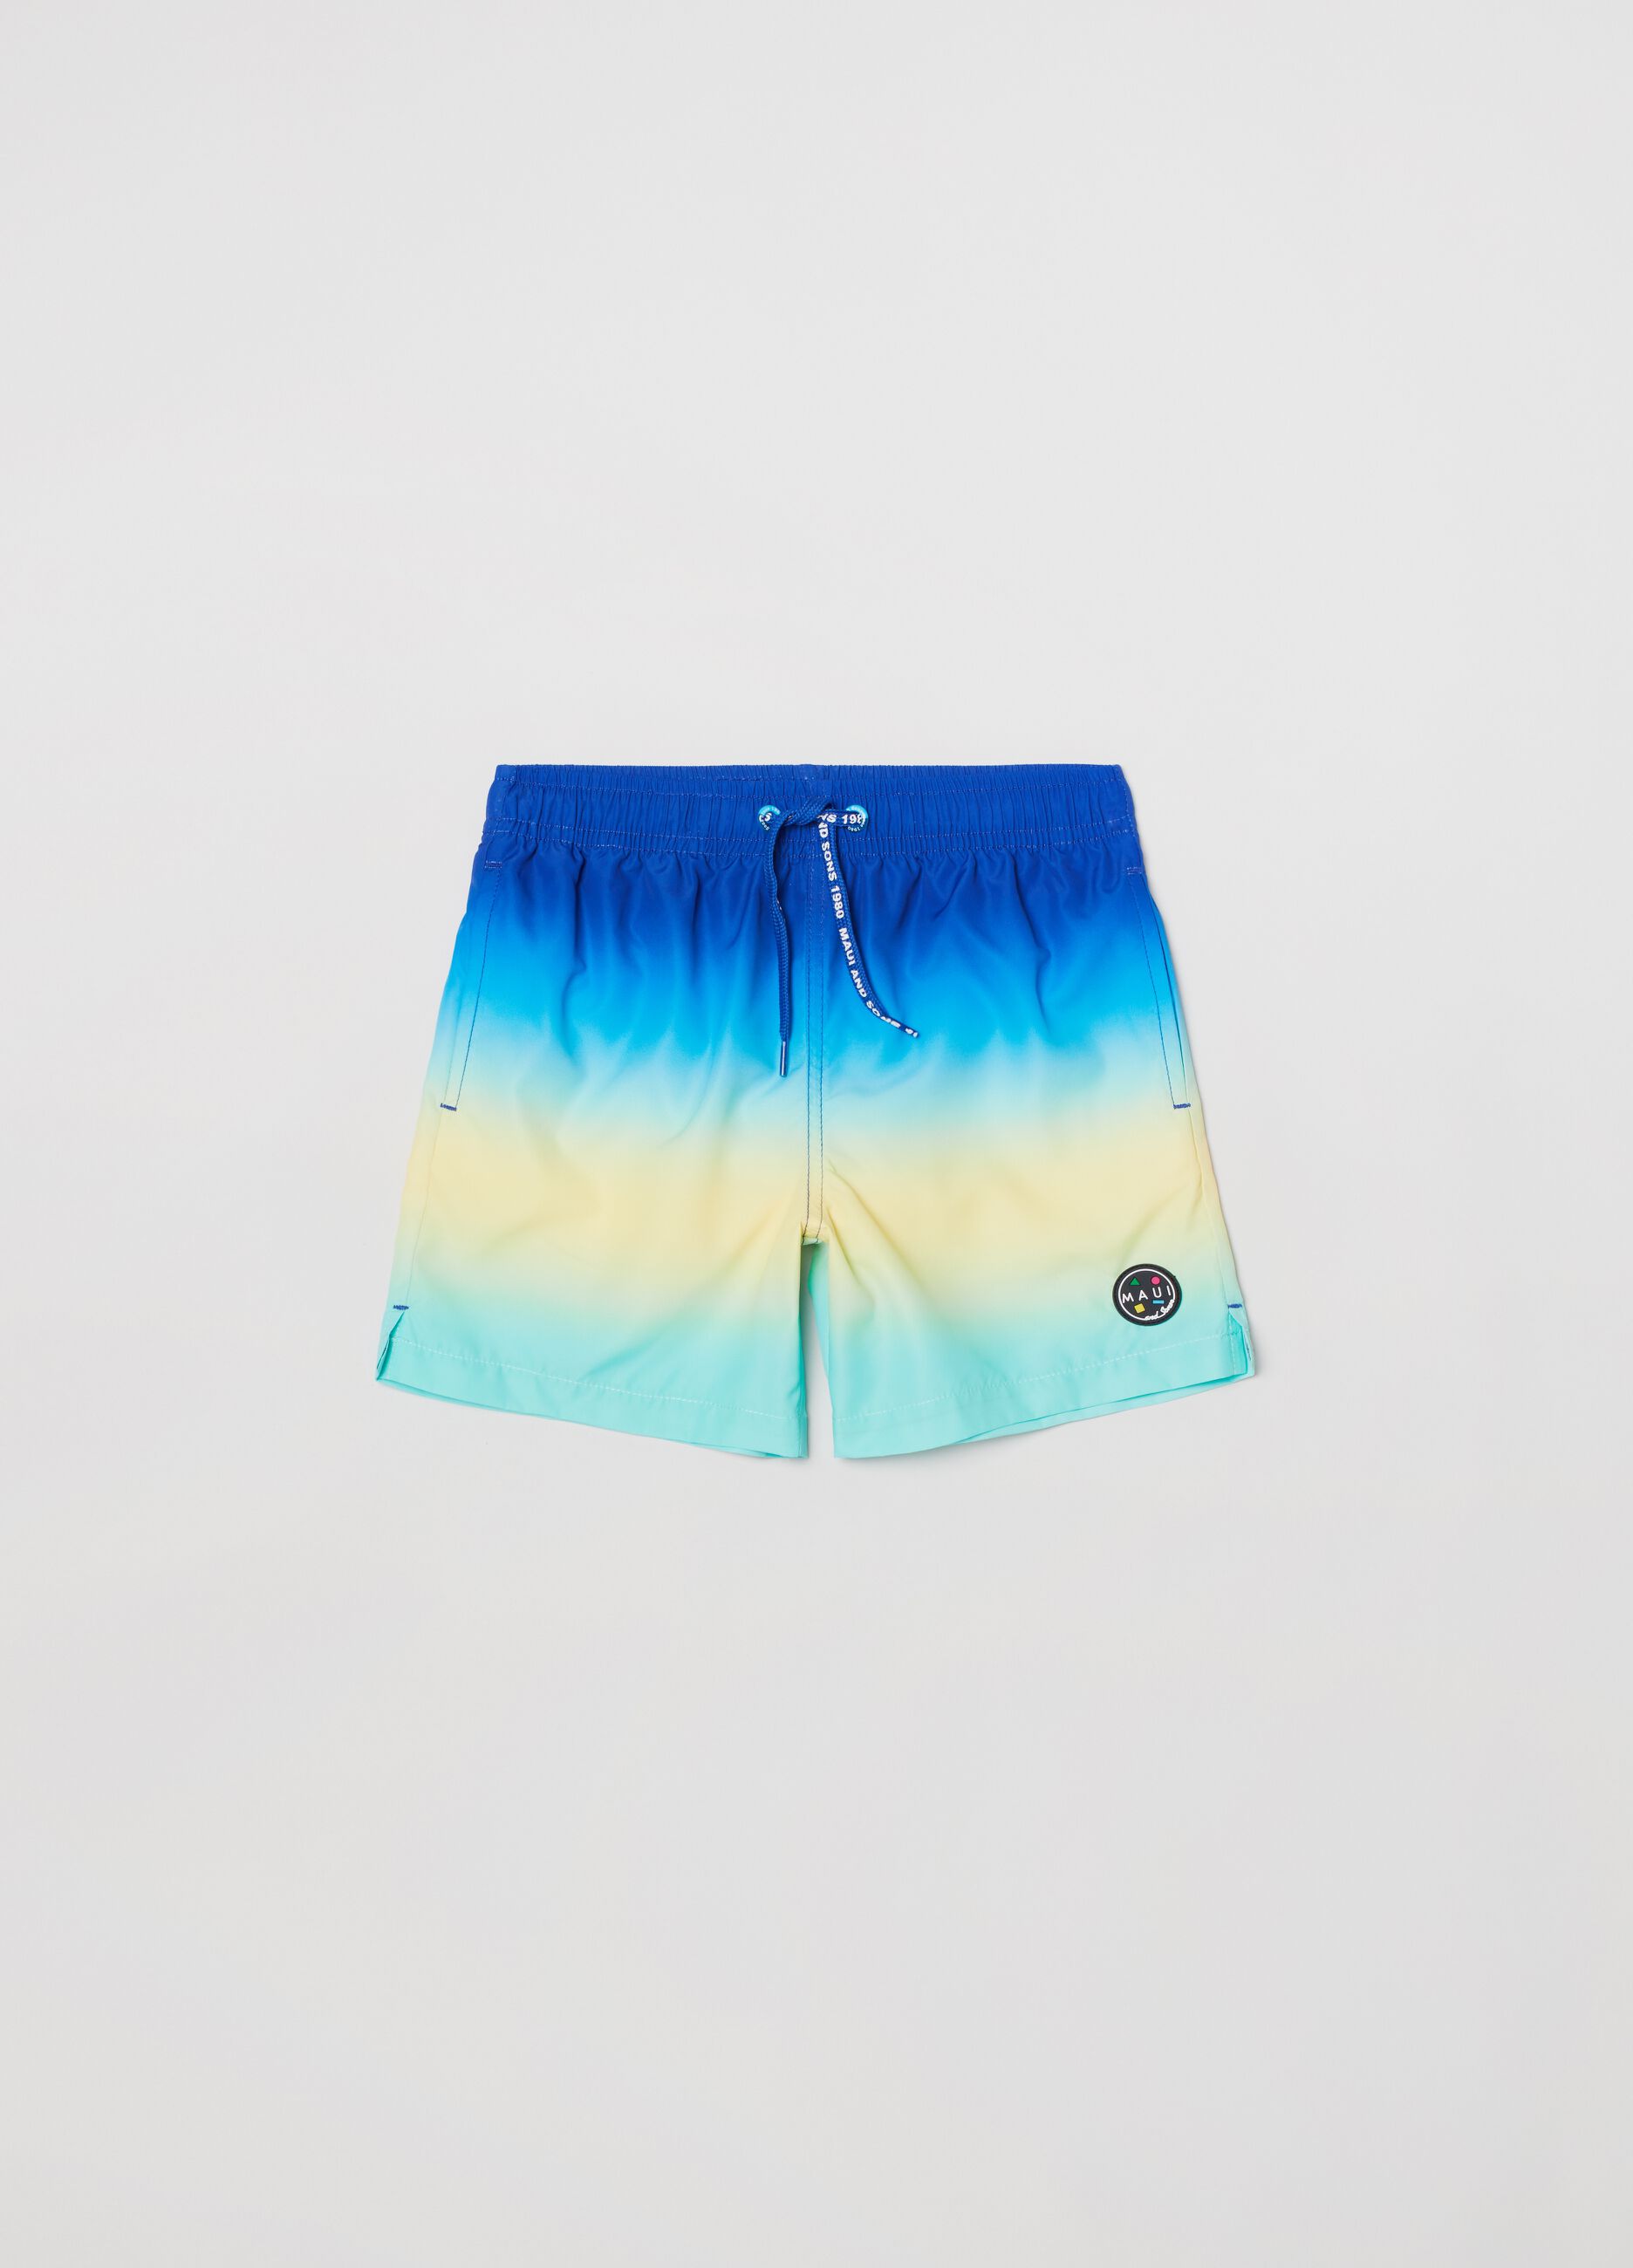 Maui and Sons degradé swimming trunks